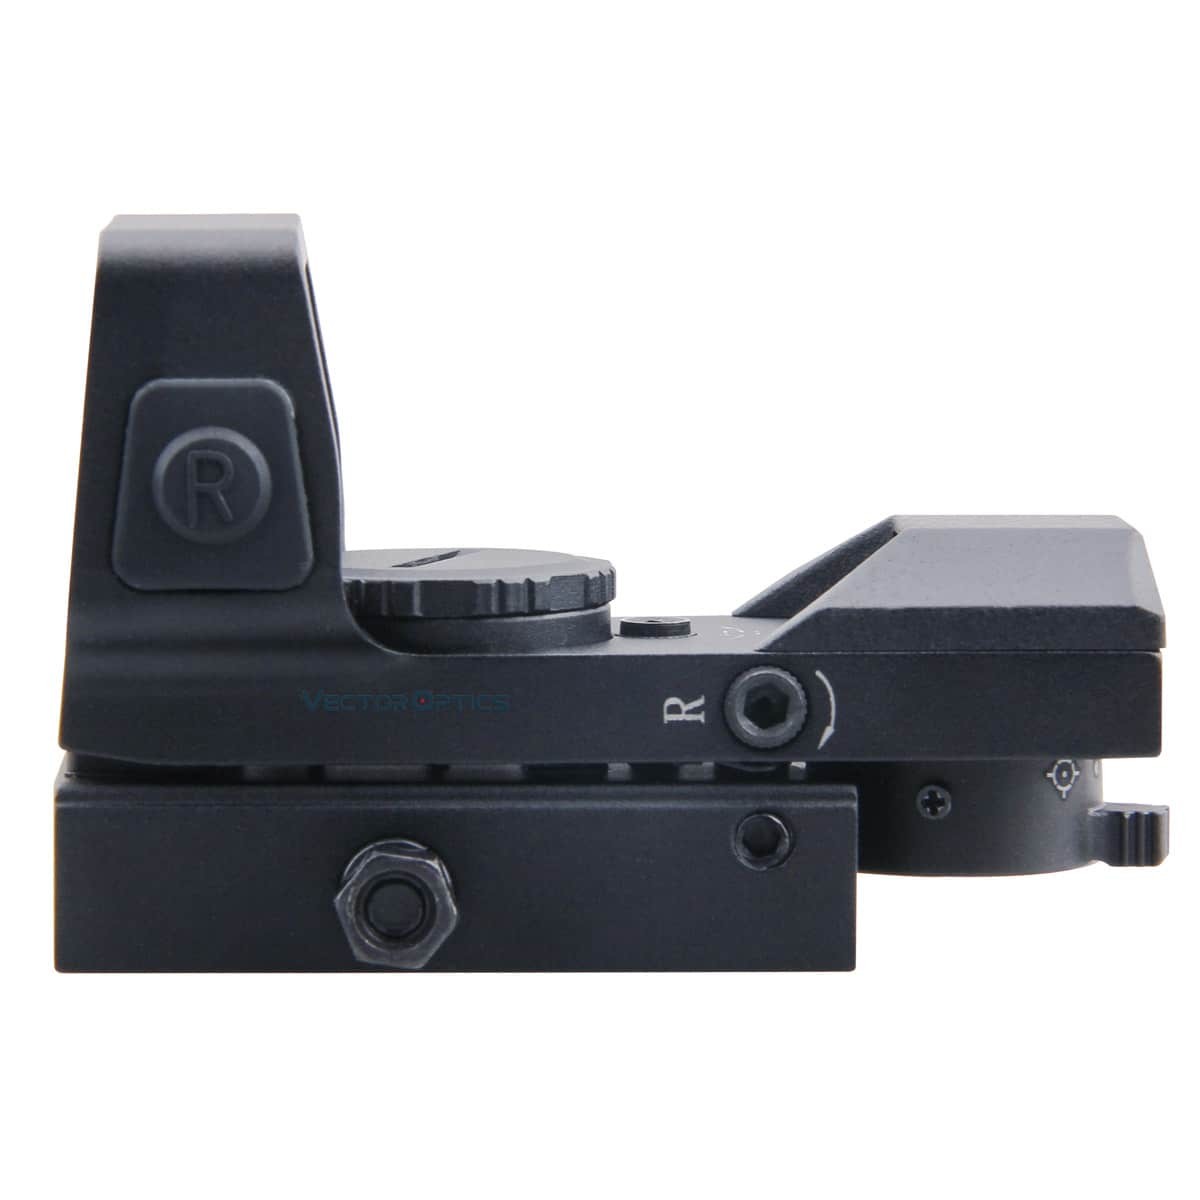 Sable 1x25x34 Red Dot Sight